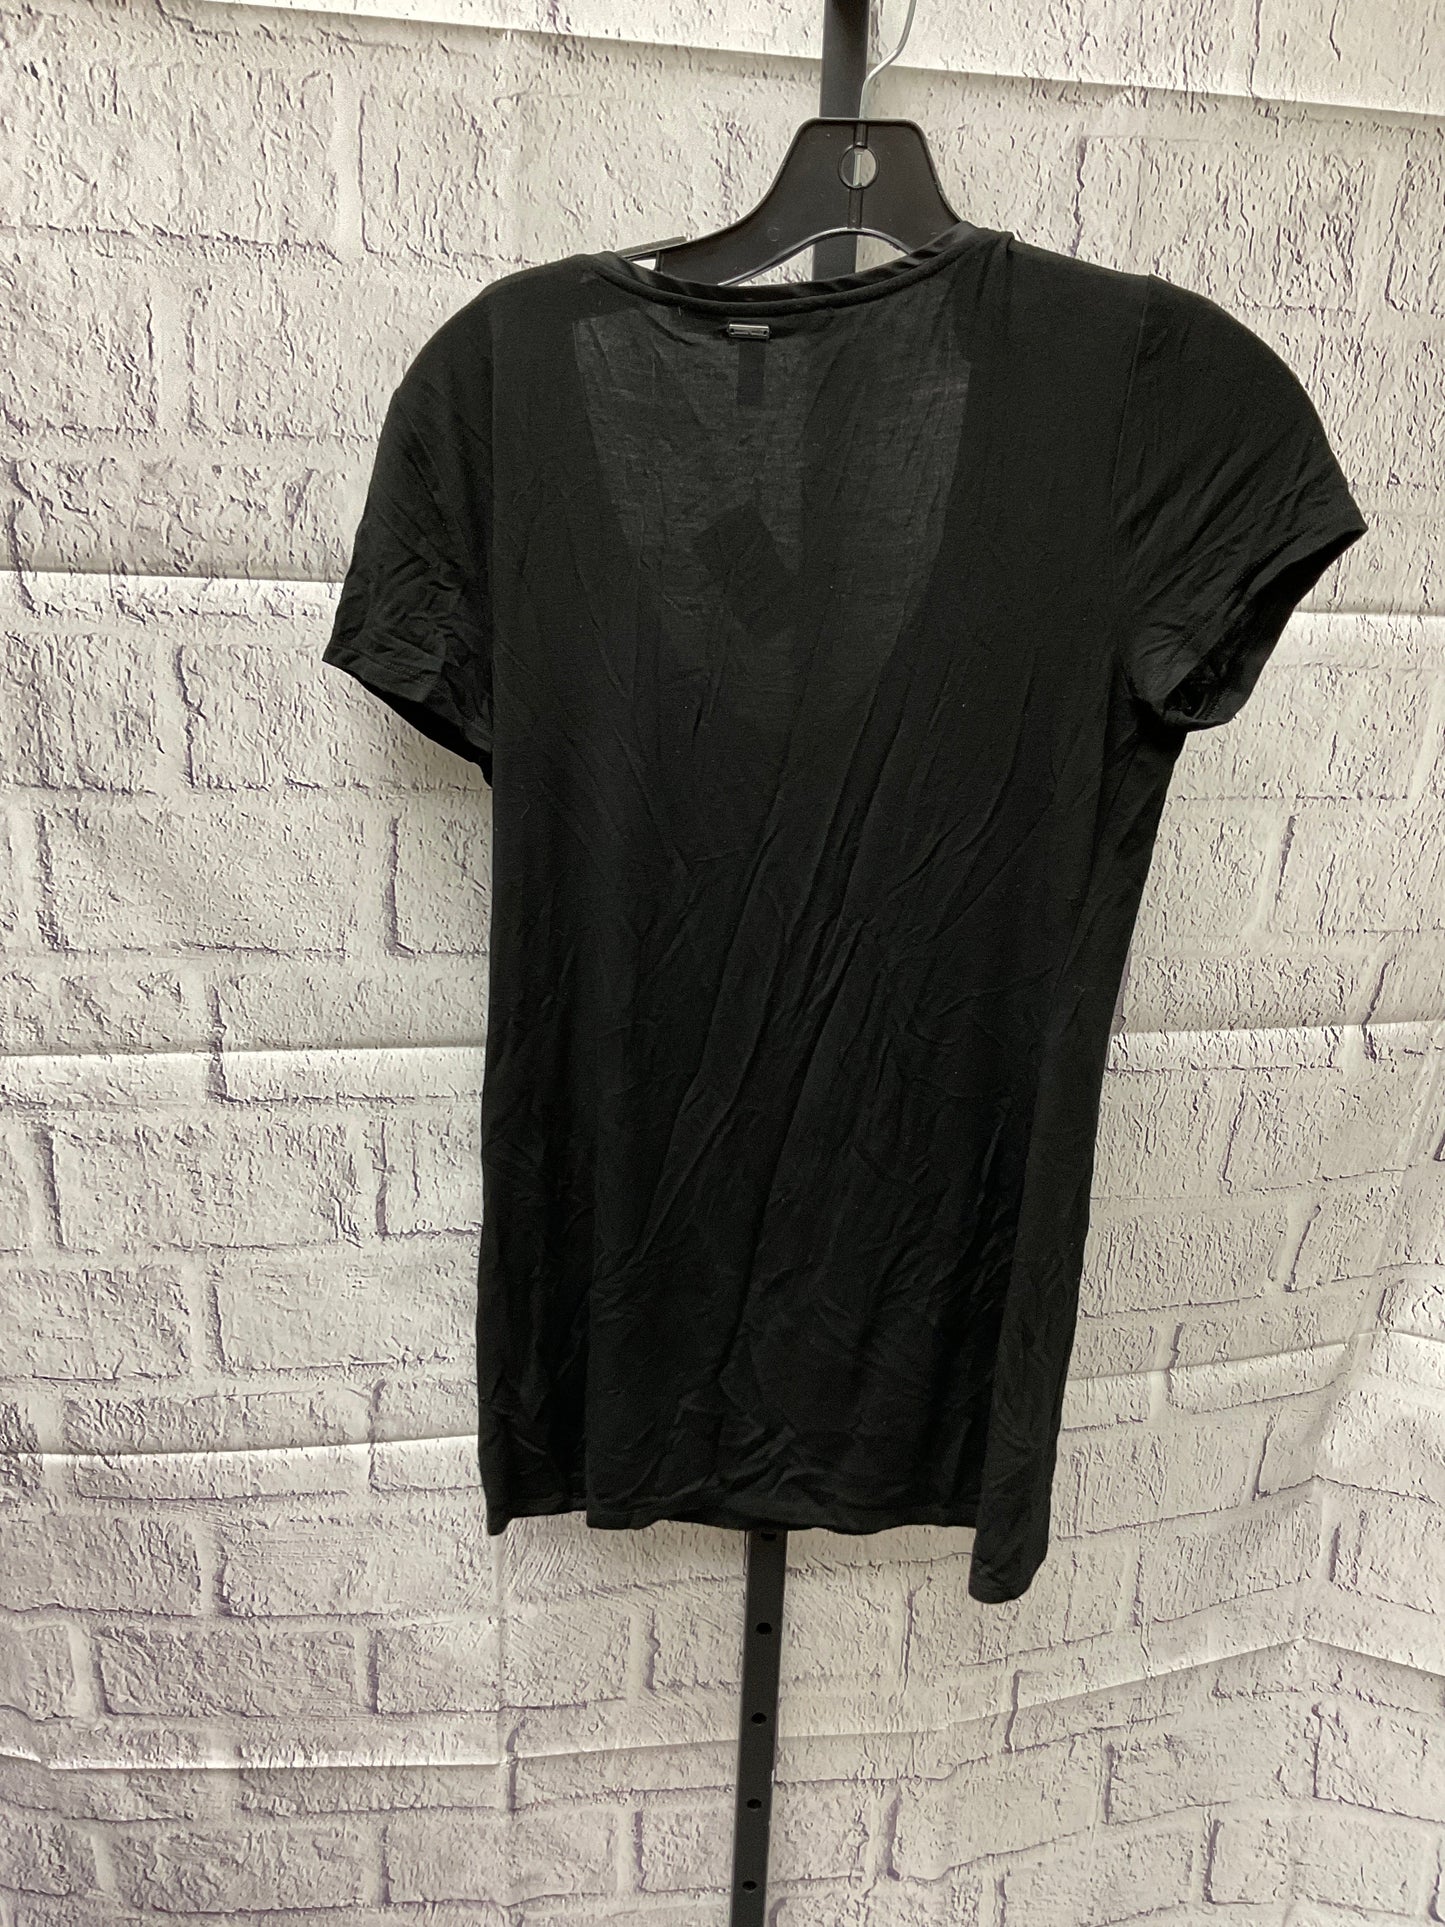 Top Short Sleeve By White House Black Market  Size: Xs